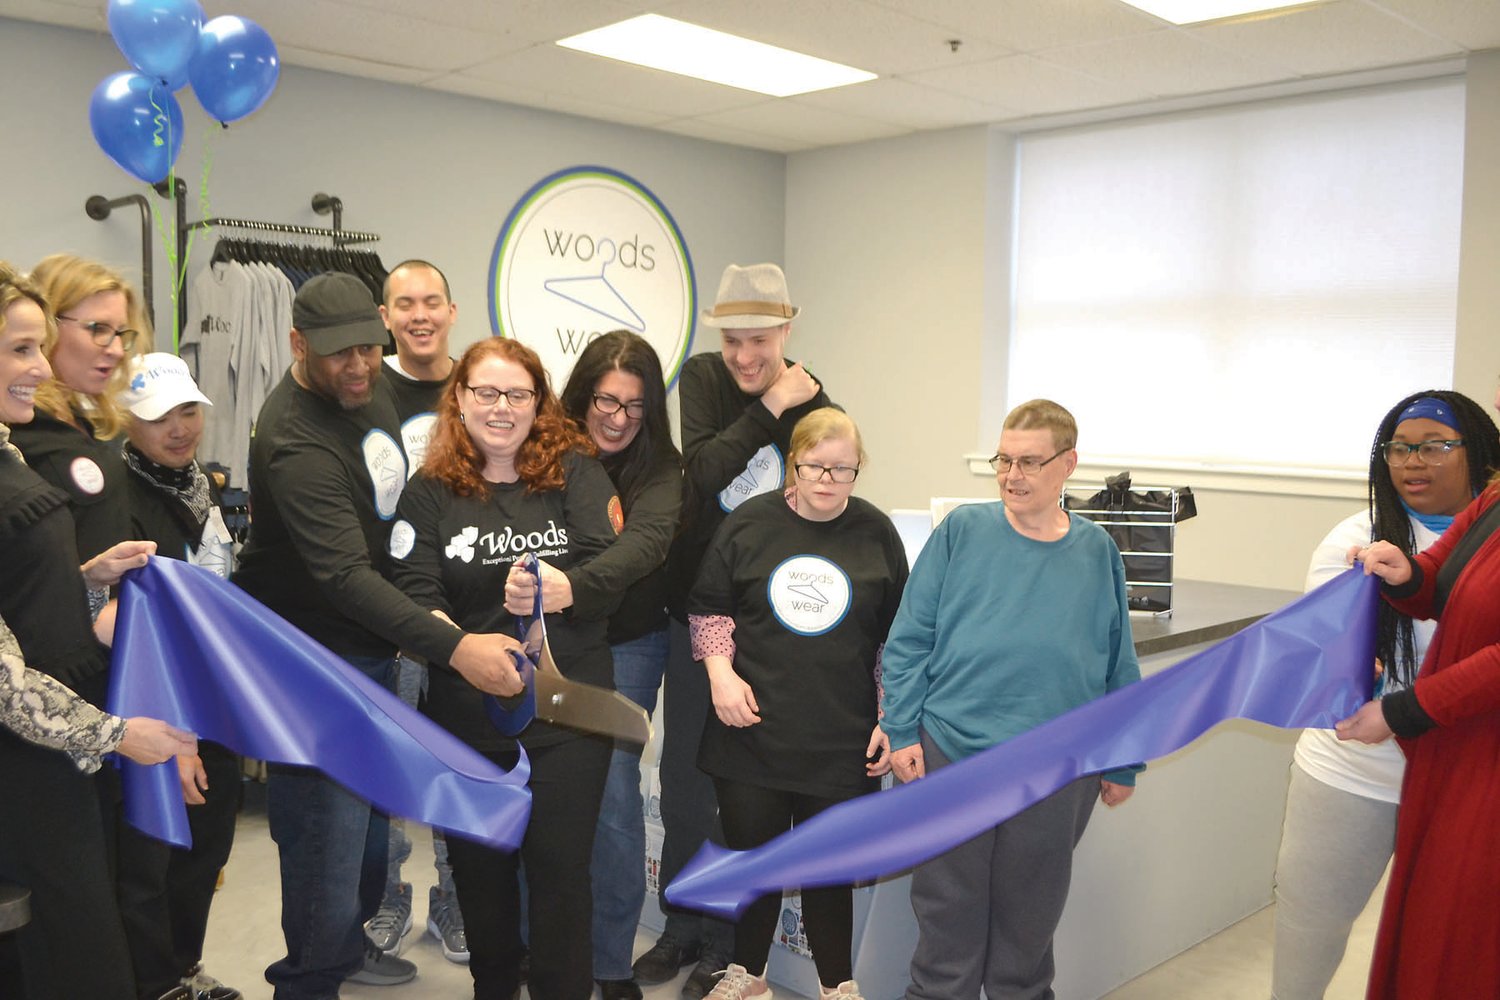 Woods Wear employees help cut the ribbon on the new apparel studio.